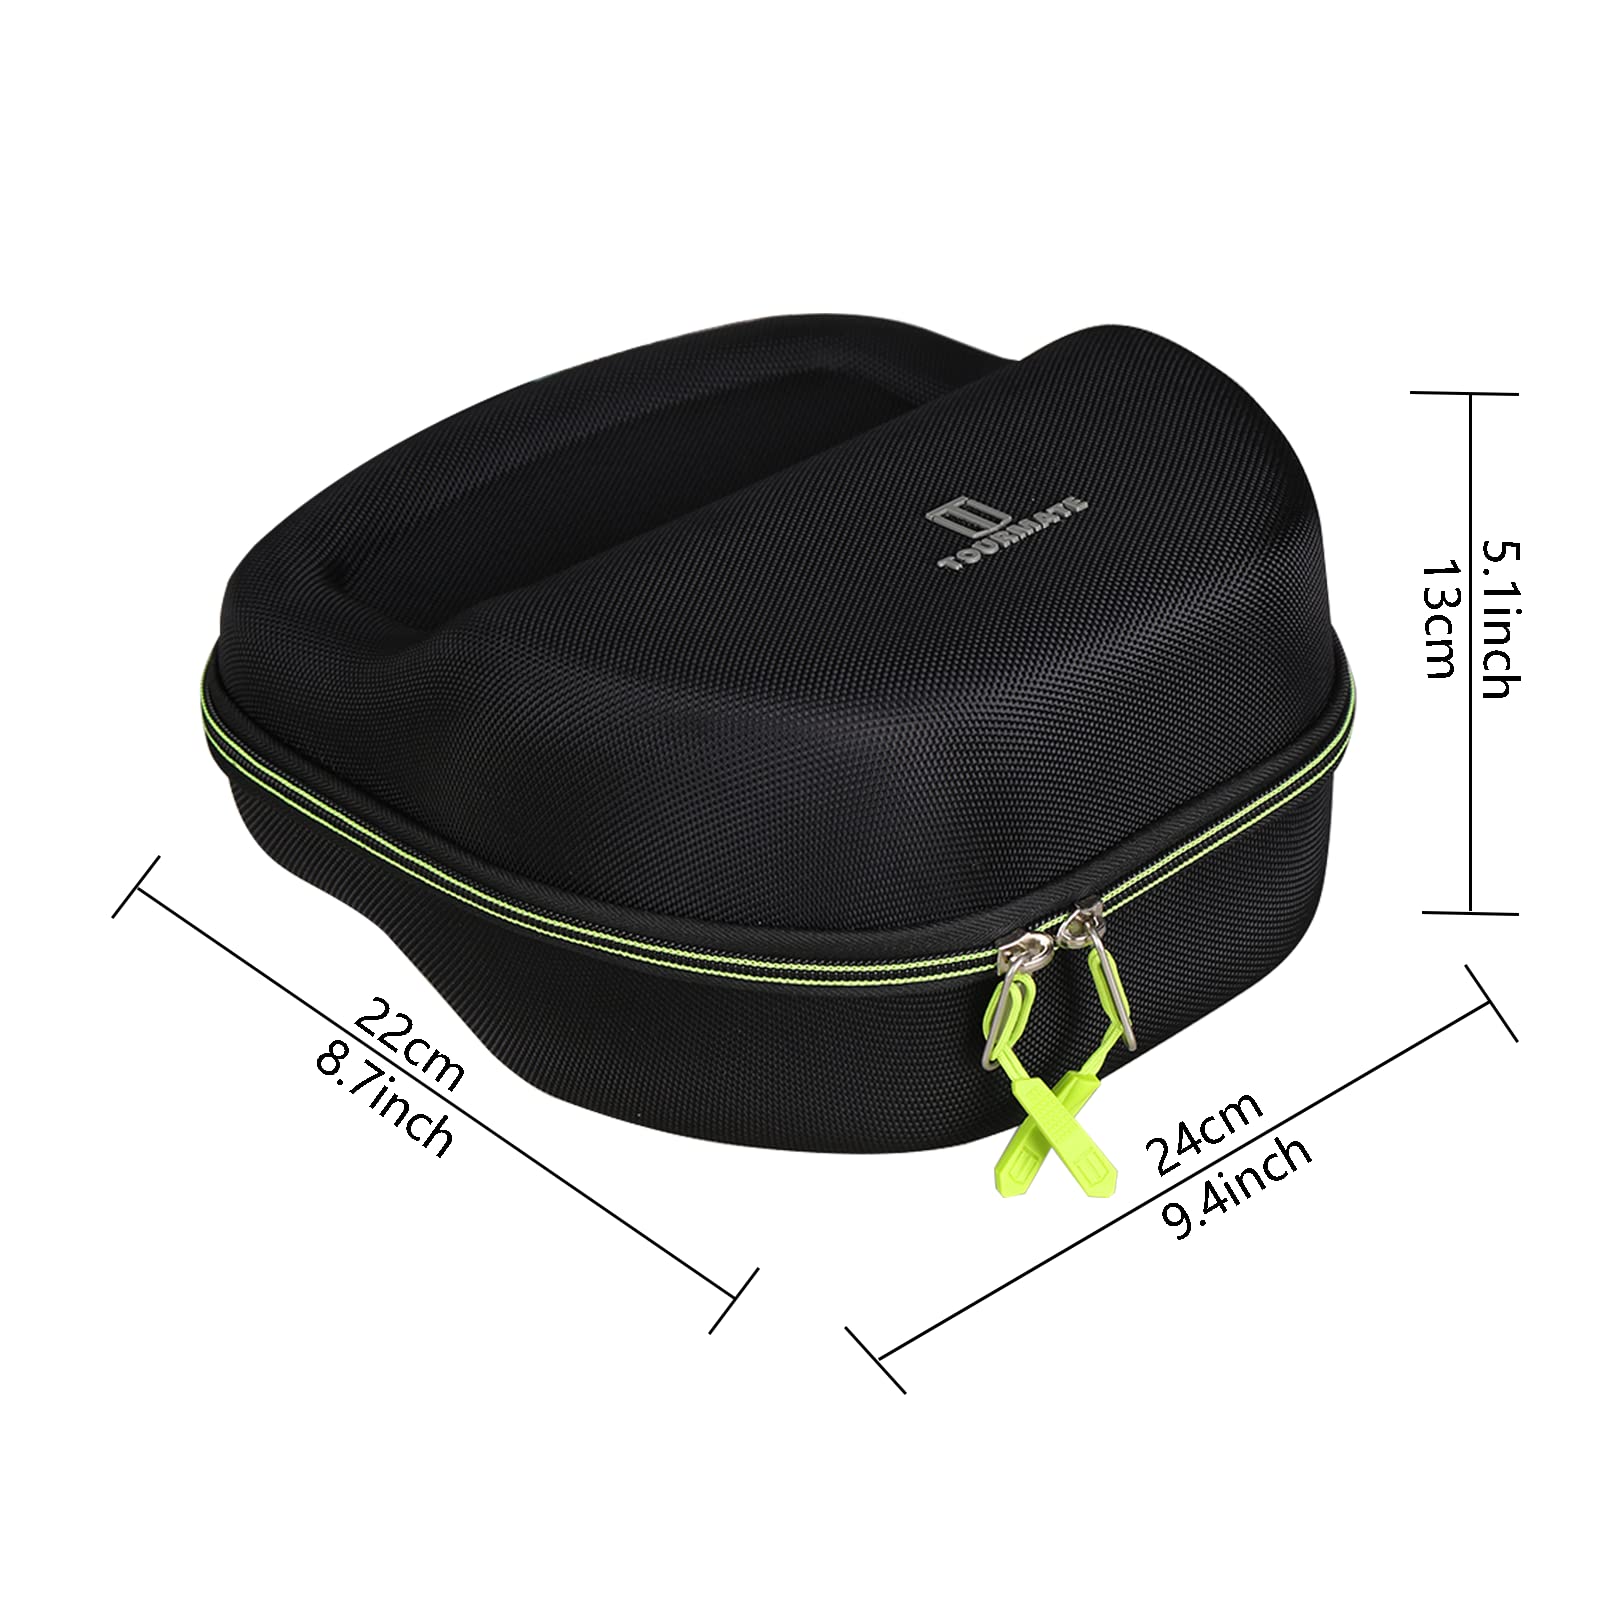 Tourmate Hard Travel Case for Astro Gaming A20 Wireless Headset Gen 2, Protective Carrying Storage Bag